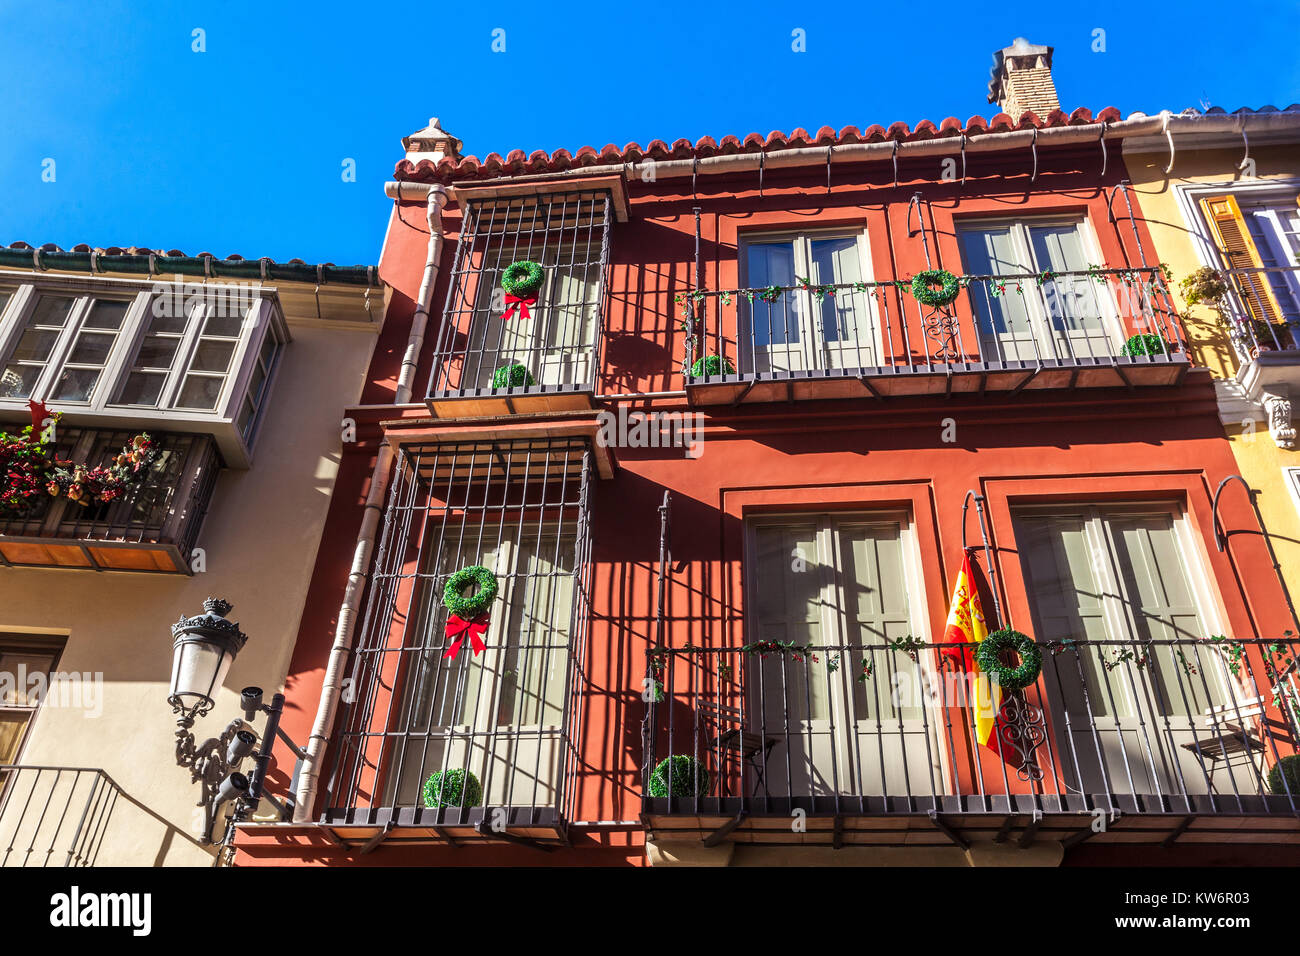 Malaga architecture, facades of buildings in the Malaga Old Town, Spain Stock Photo